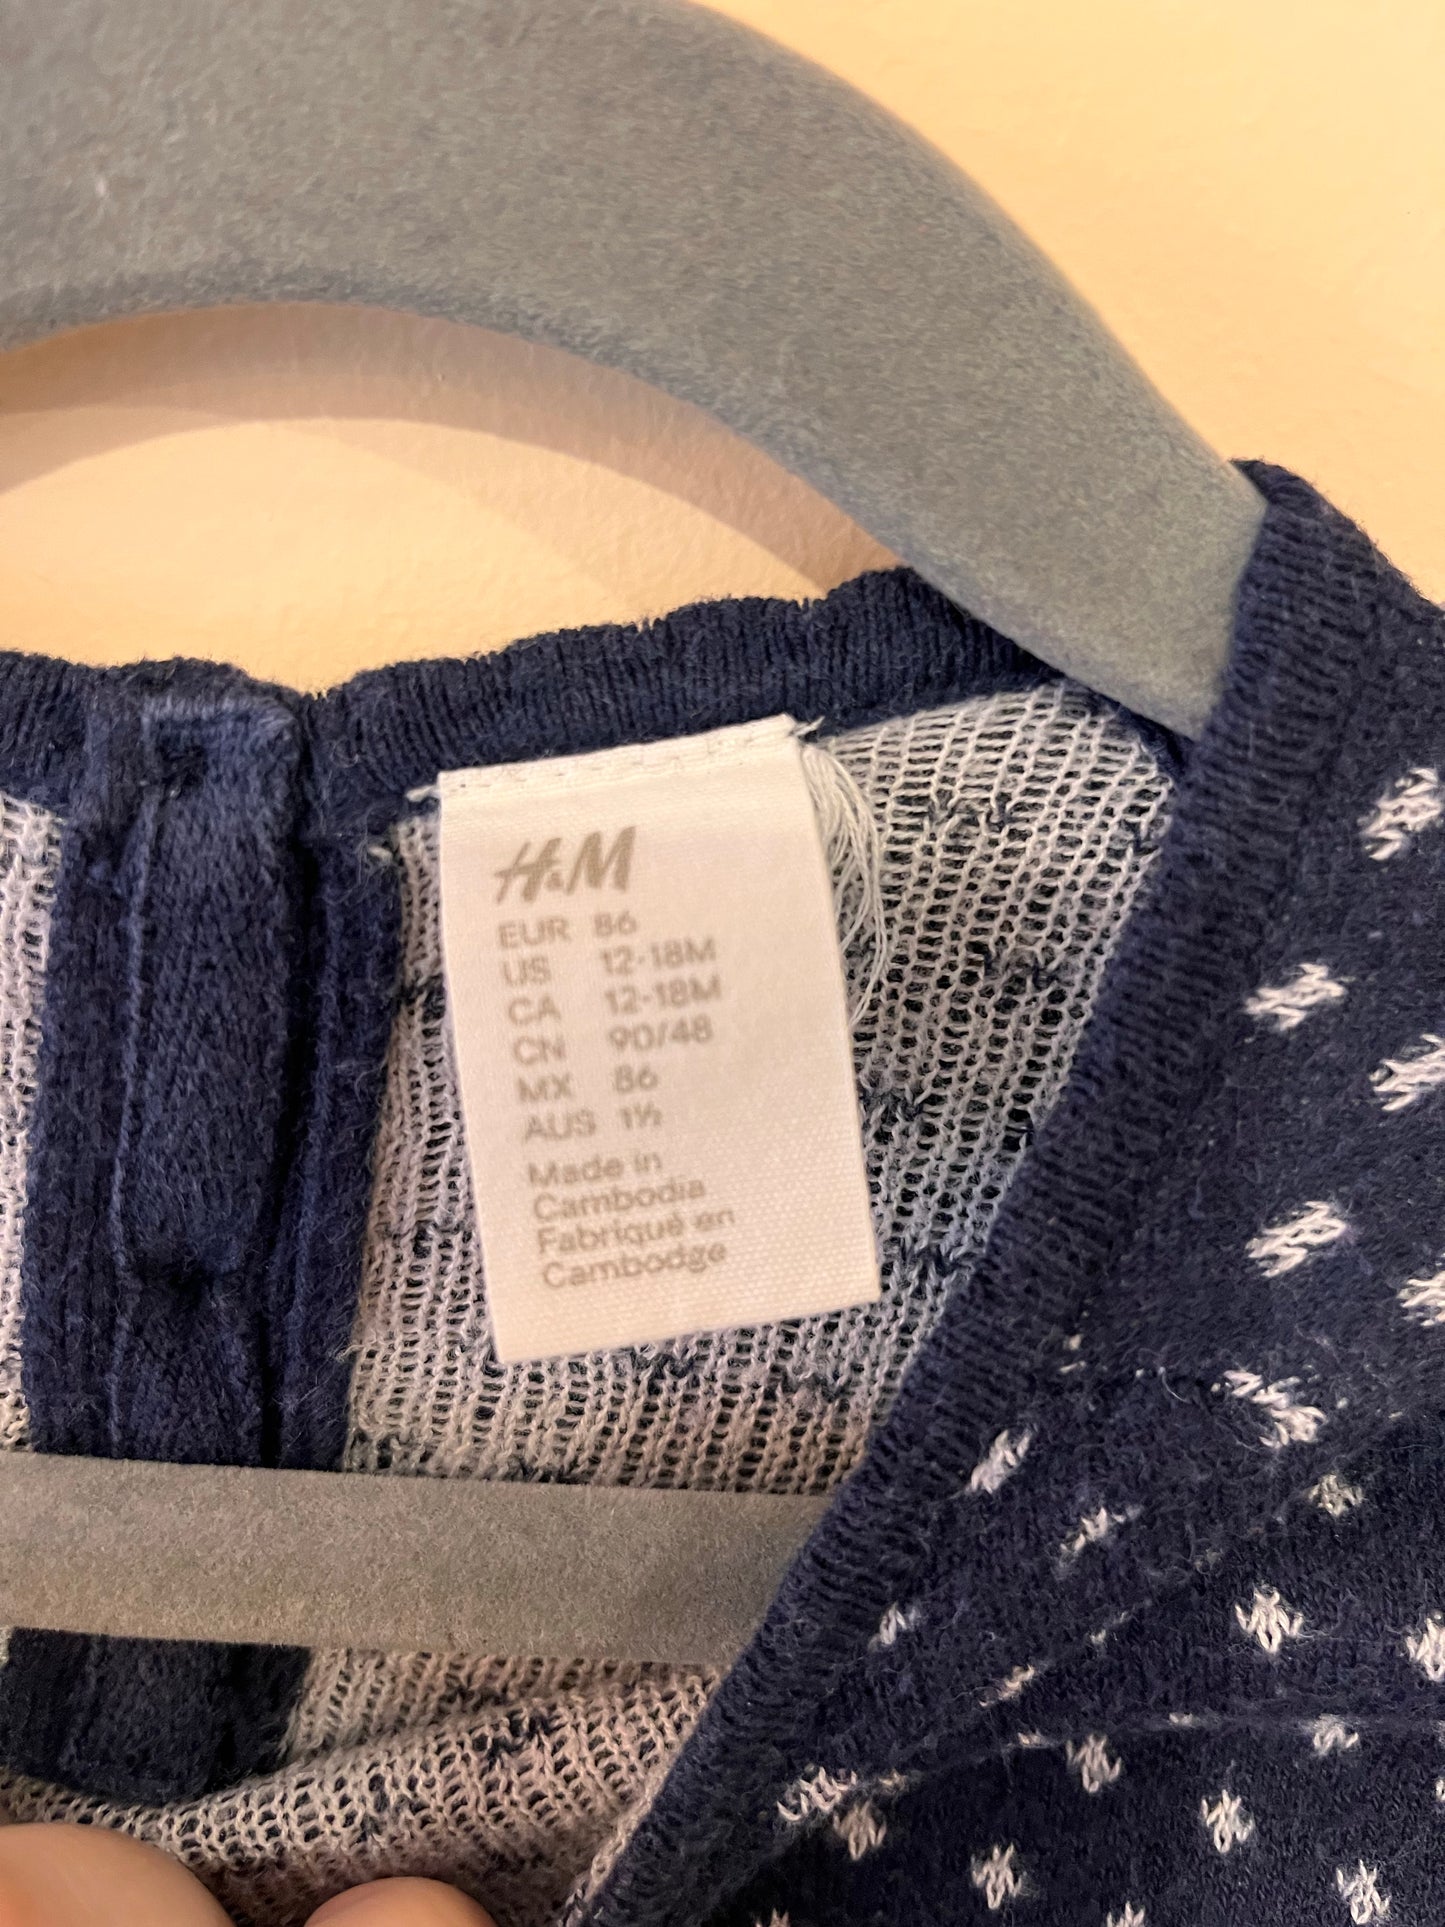 H&M Knit Bunny Sweater (12-18)